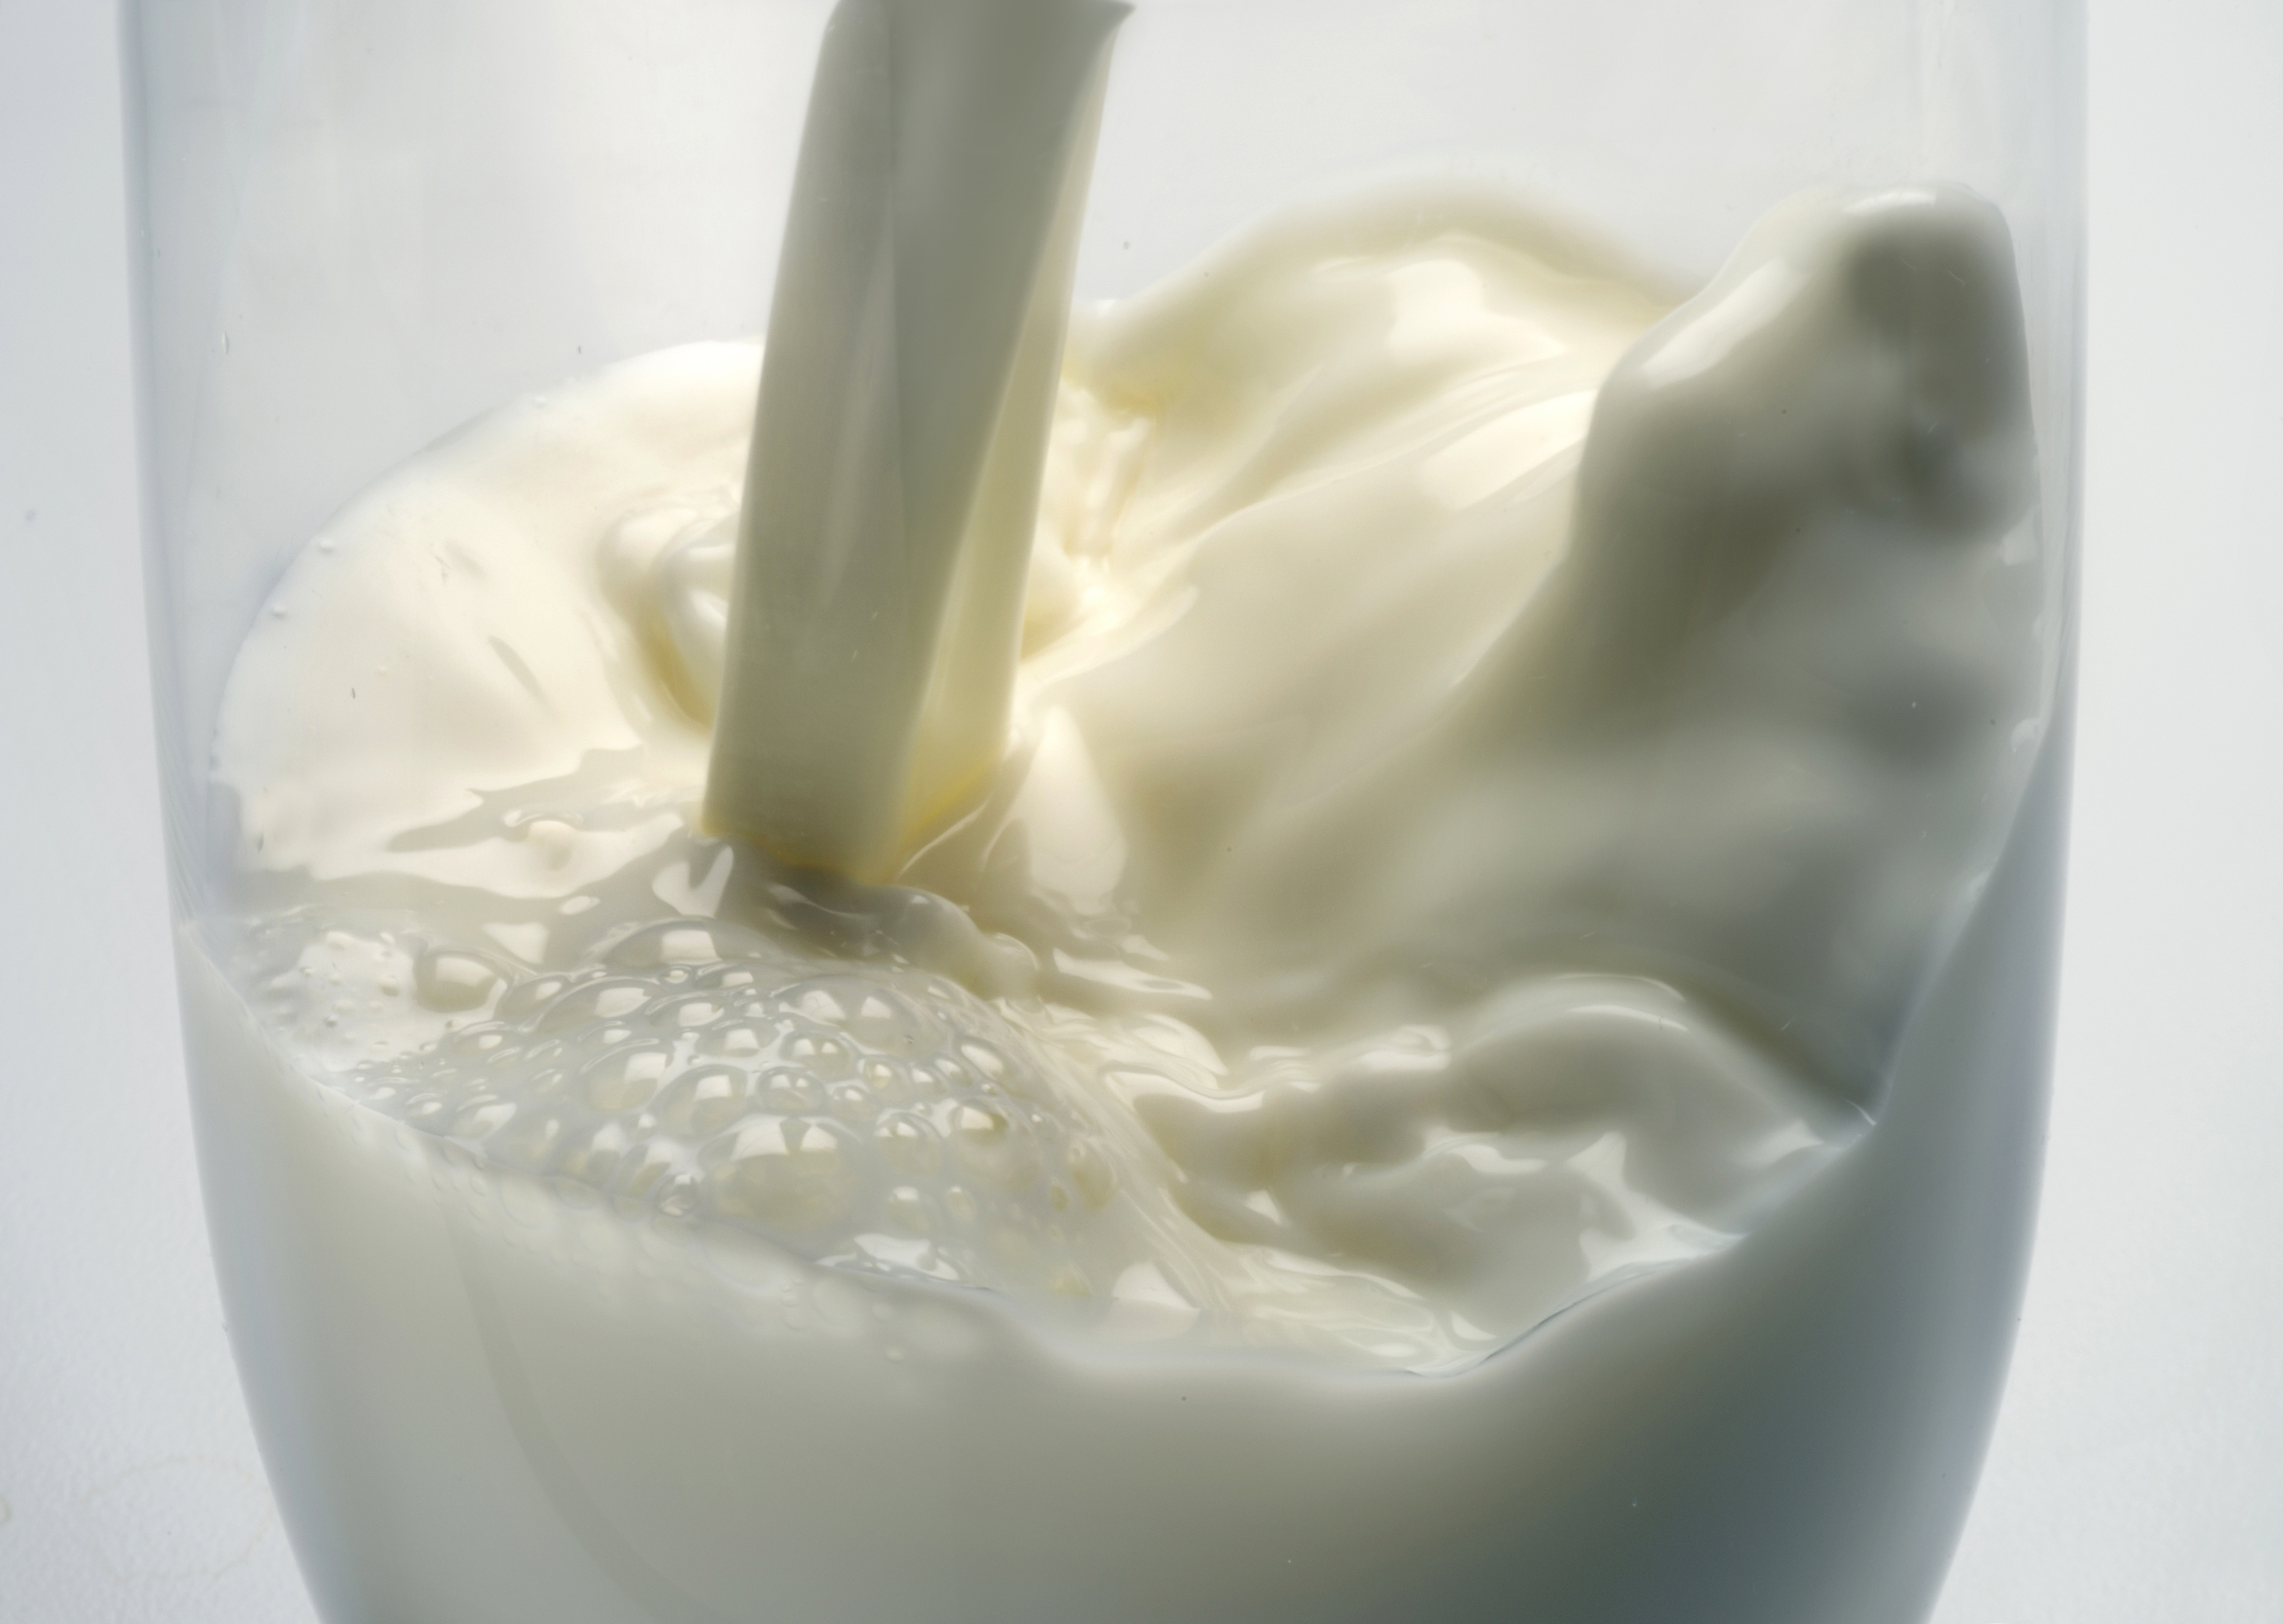 Close-up of milk being poured into a glass, creating a splash